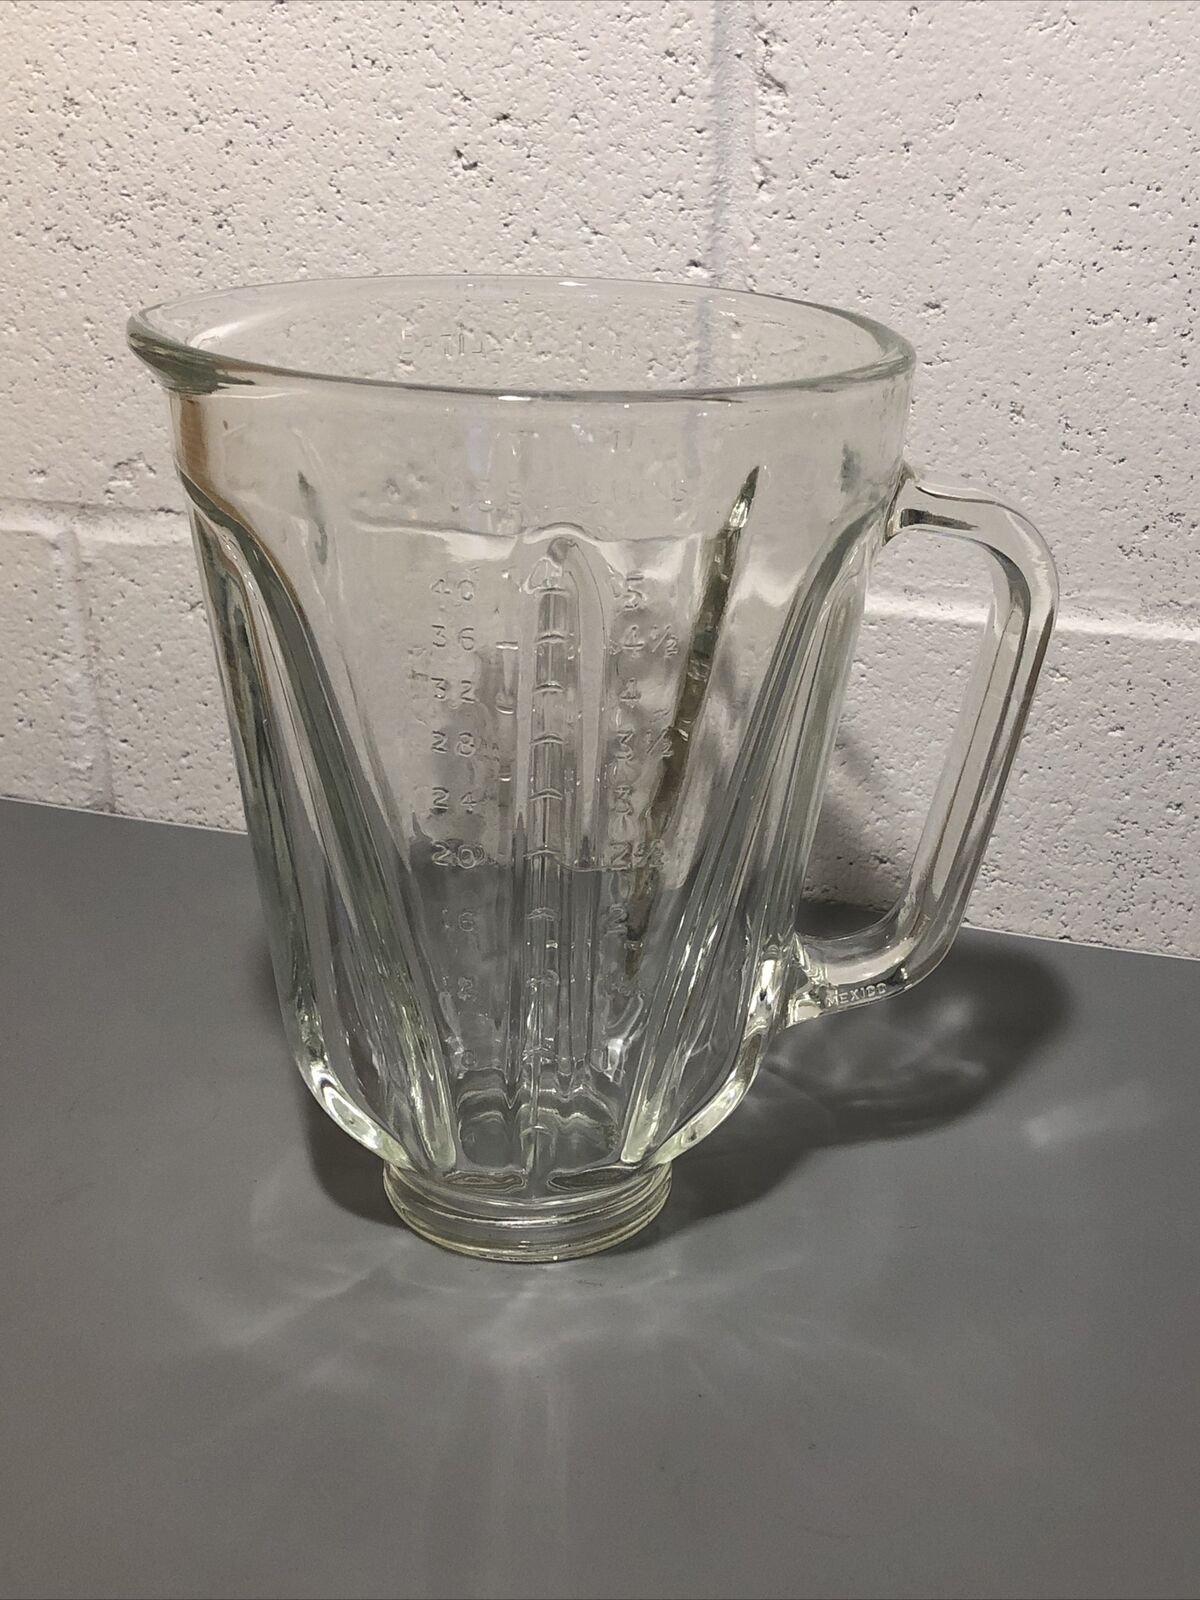 HAMILTON BEACH Blender 40 oz Luxury goods Selling and selling Jar Glass 54200 Pitcher